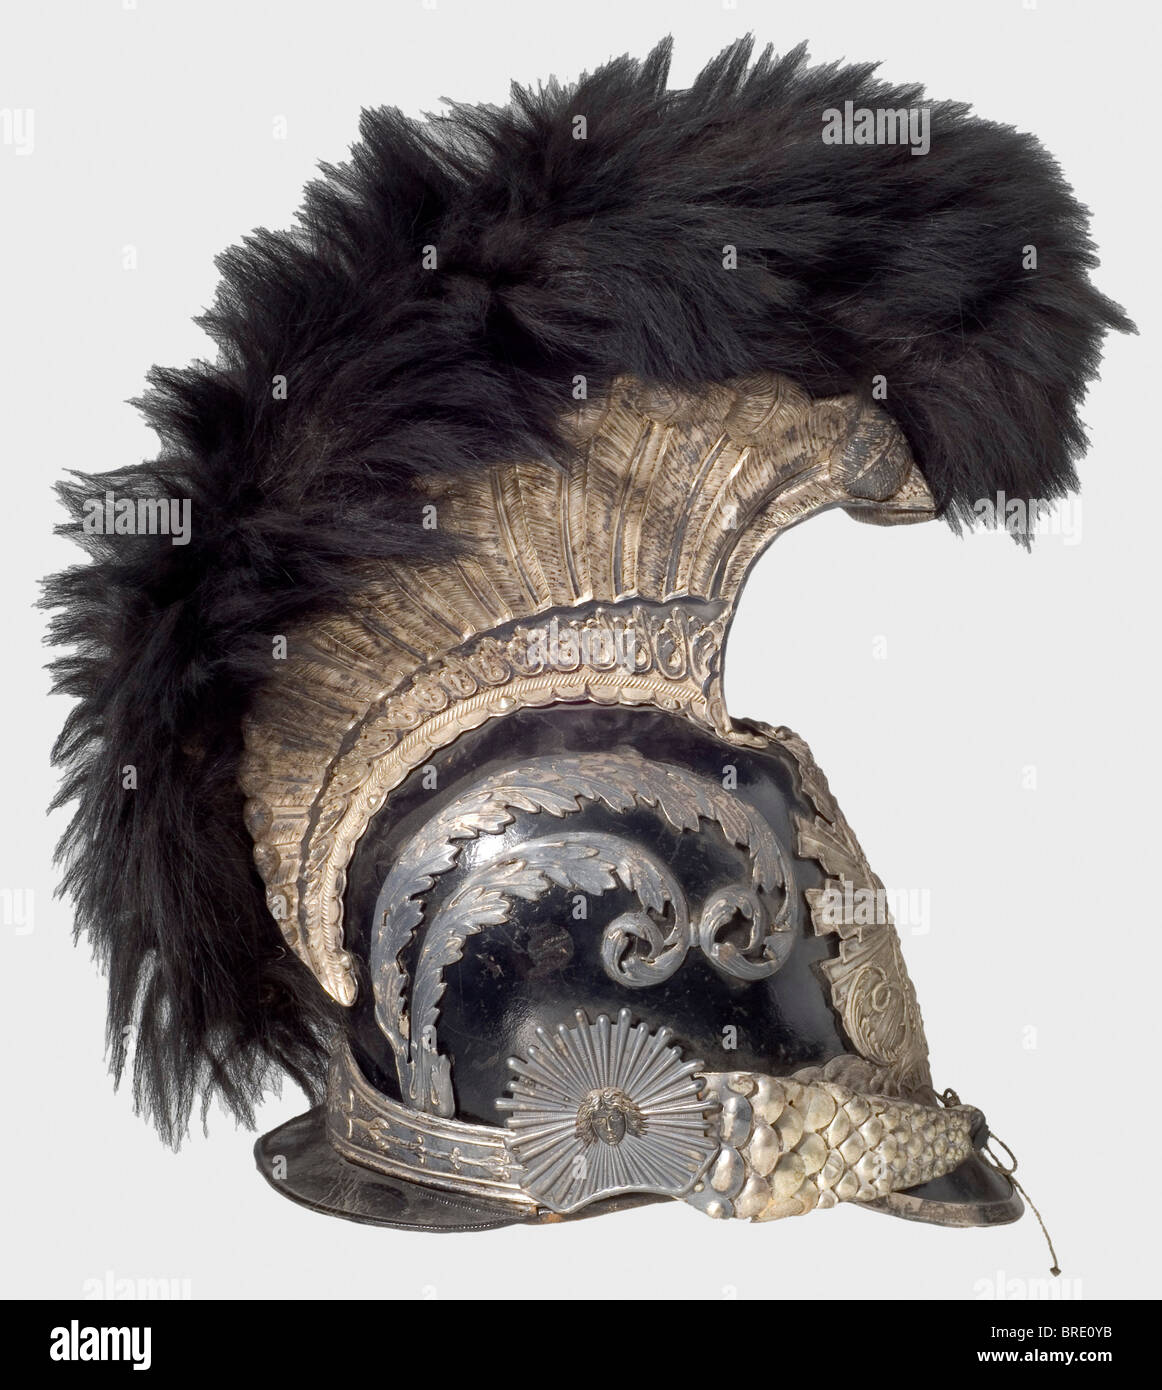 A model 1814 helmet for enlisted men, of the Gardes de Corps du Roi A lacquered leather skull with silver-plated mountings. Tall comb, also silver-plated and bearing fine relief and a black fur crest. Metal chinscales on rosettes with Medusa heads. Feather plume missing. Leather sweatband with silk lining. An illegible owner's name inside the front peak. Silver-plated pieces tarnished. Comb lightly indented on the left side, the leather backing of the chinstrap is torn, and the velvet lining is badly worn. The interior fittings display marks of wear and age. He, Stock Photo